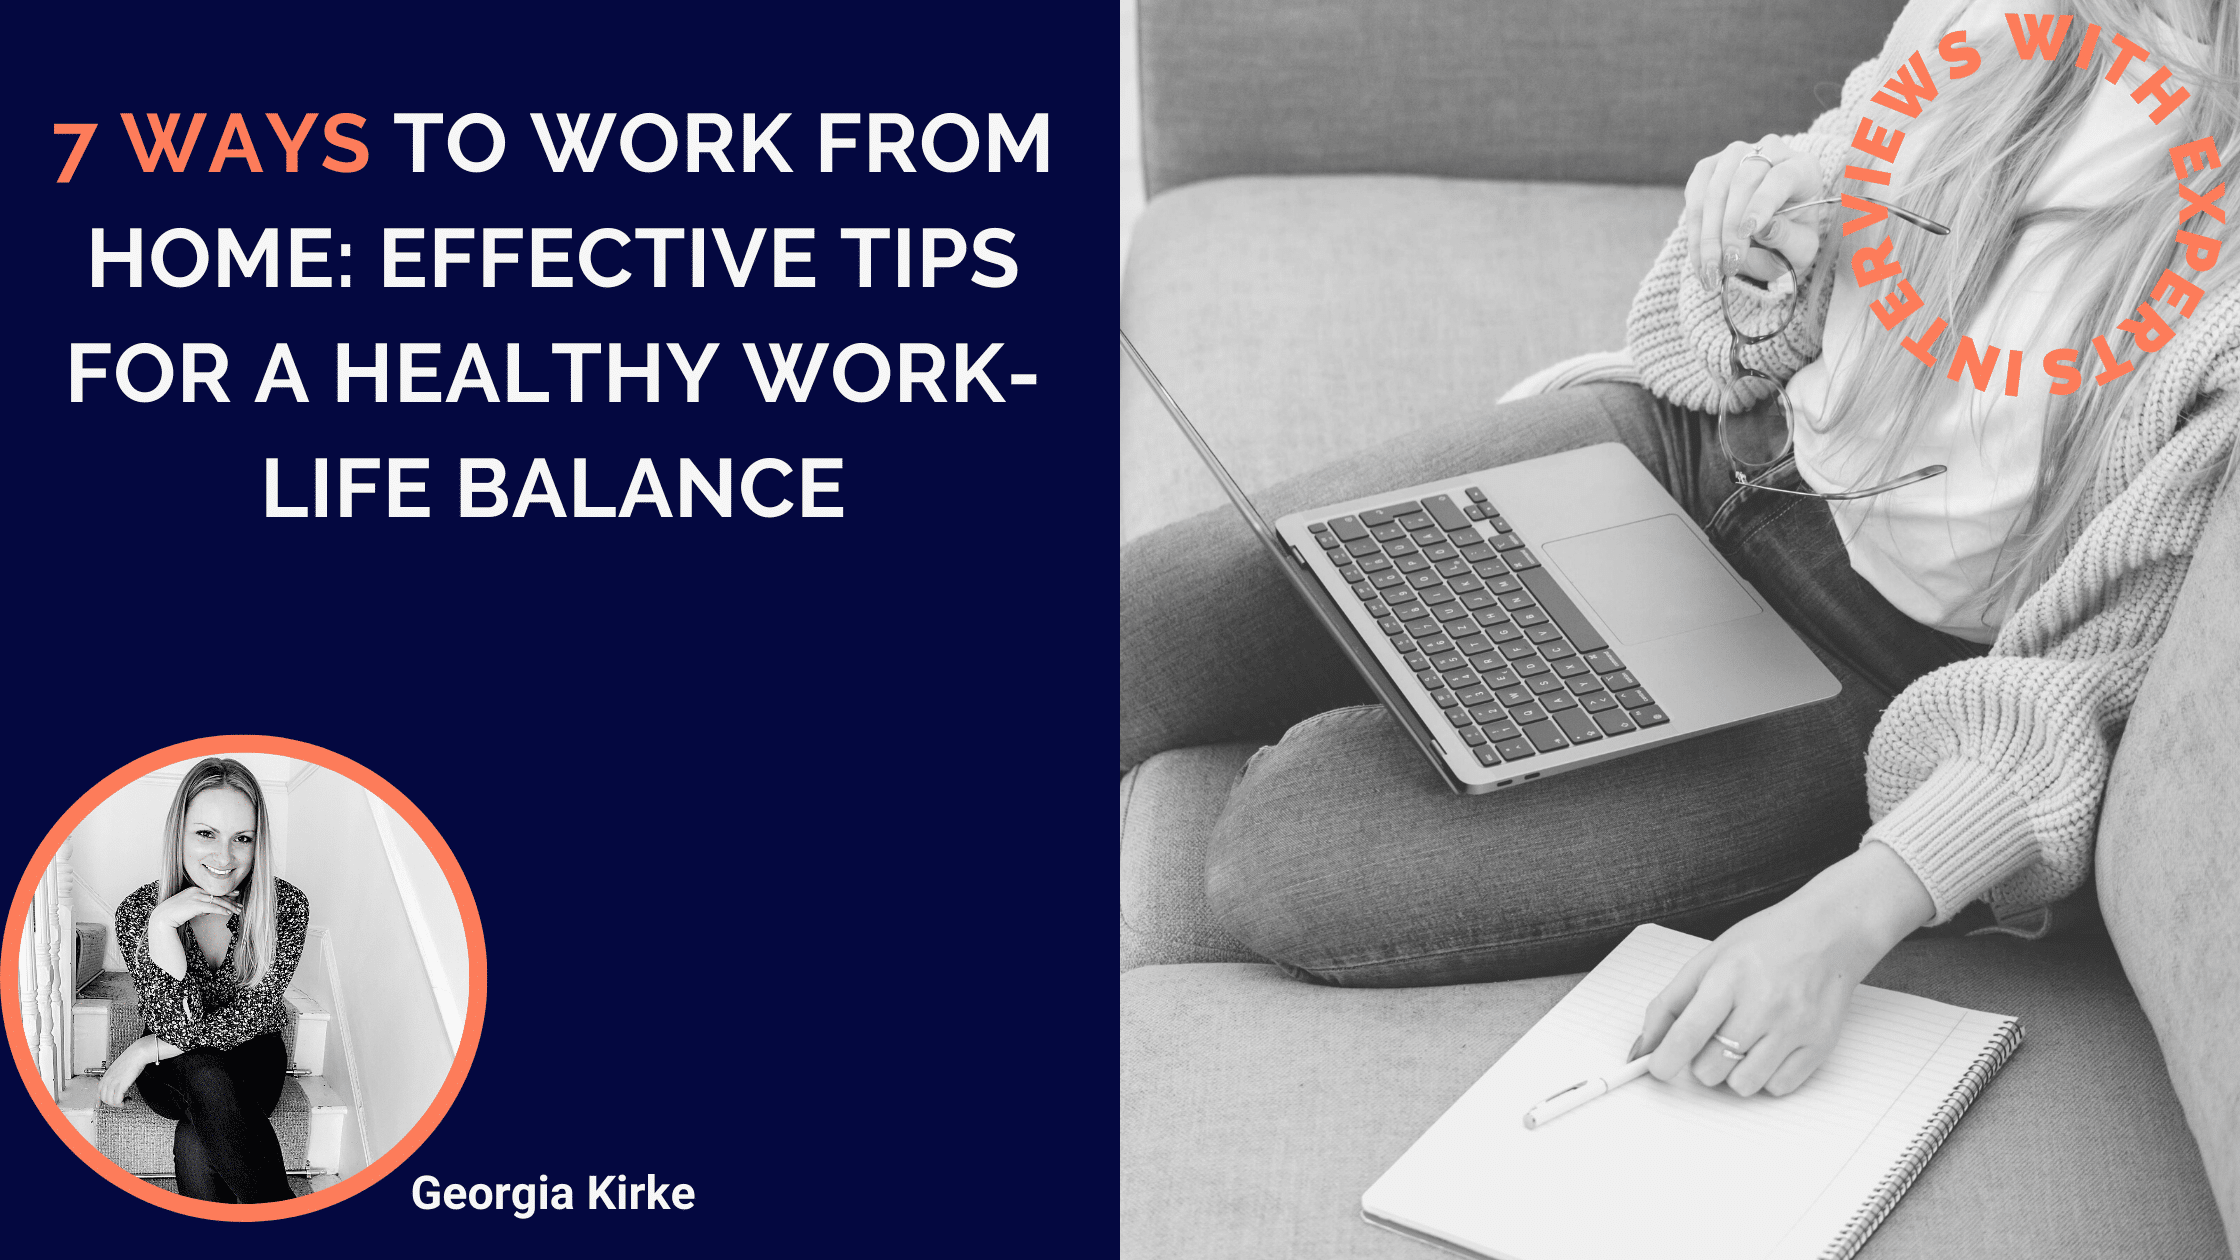 7 Ways to Work From Home: Effective Tips For A Healthy Work-life Balance